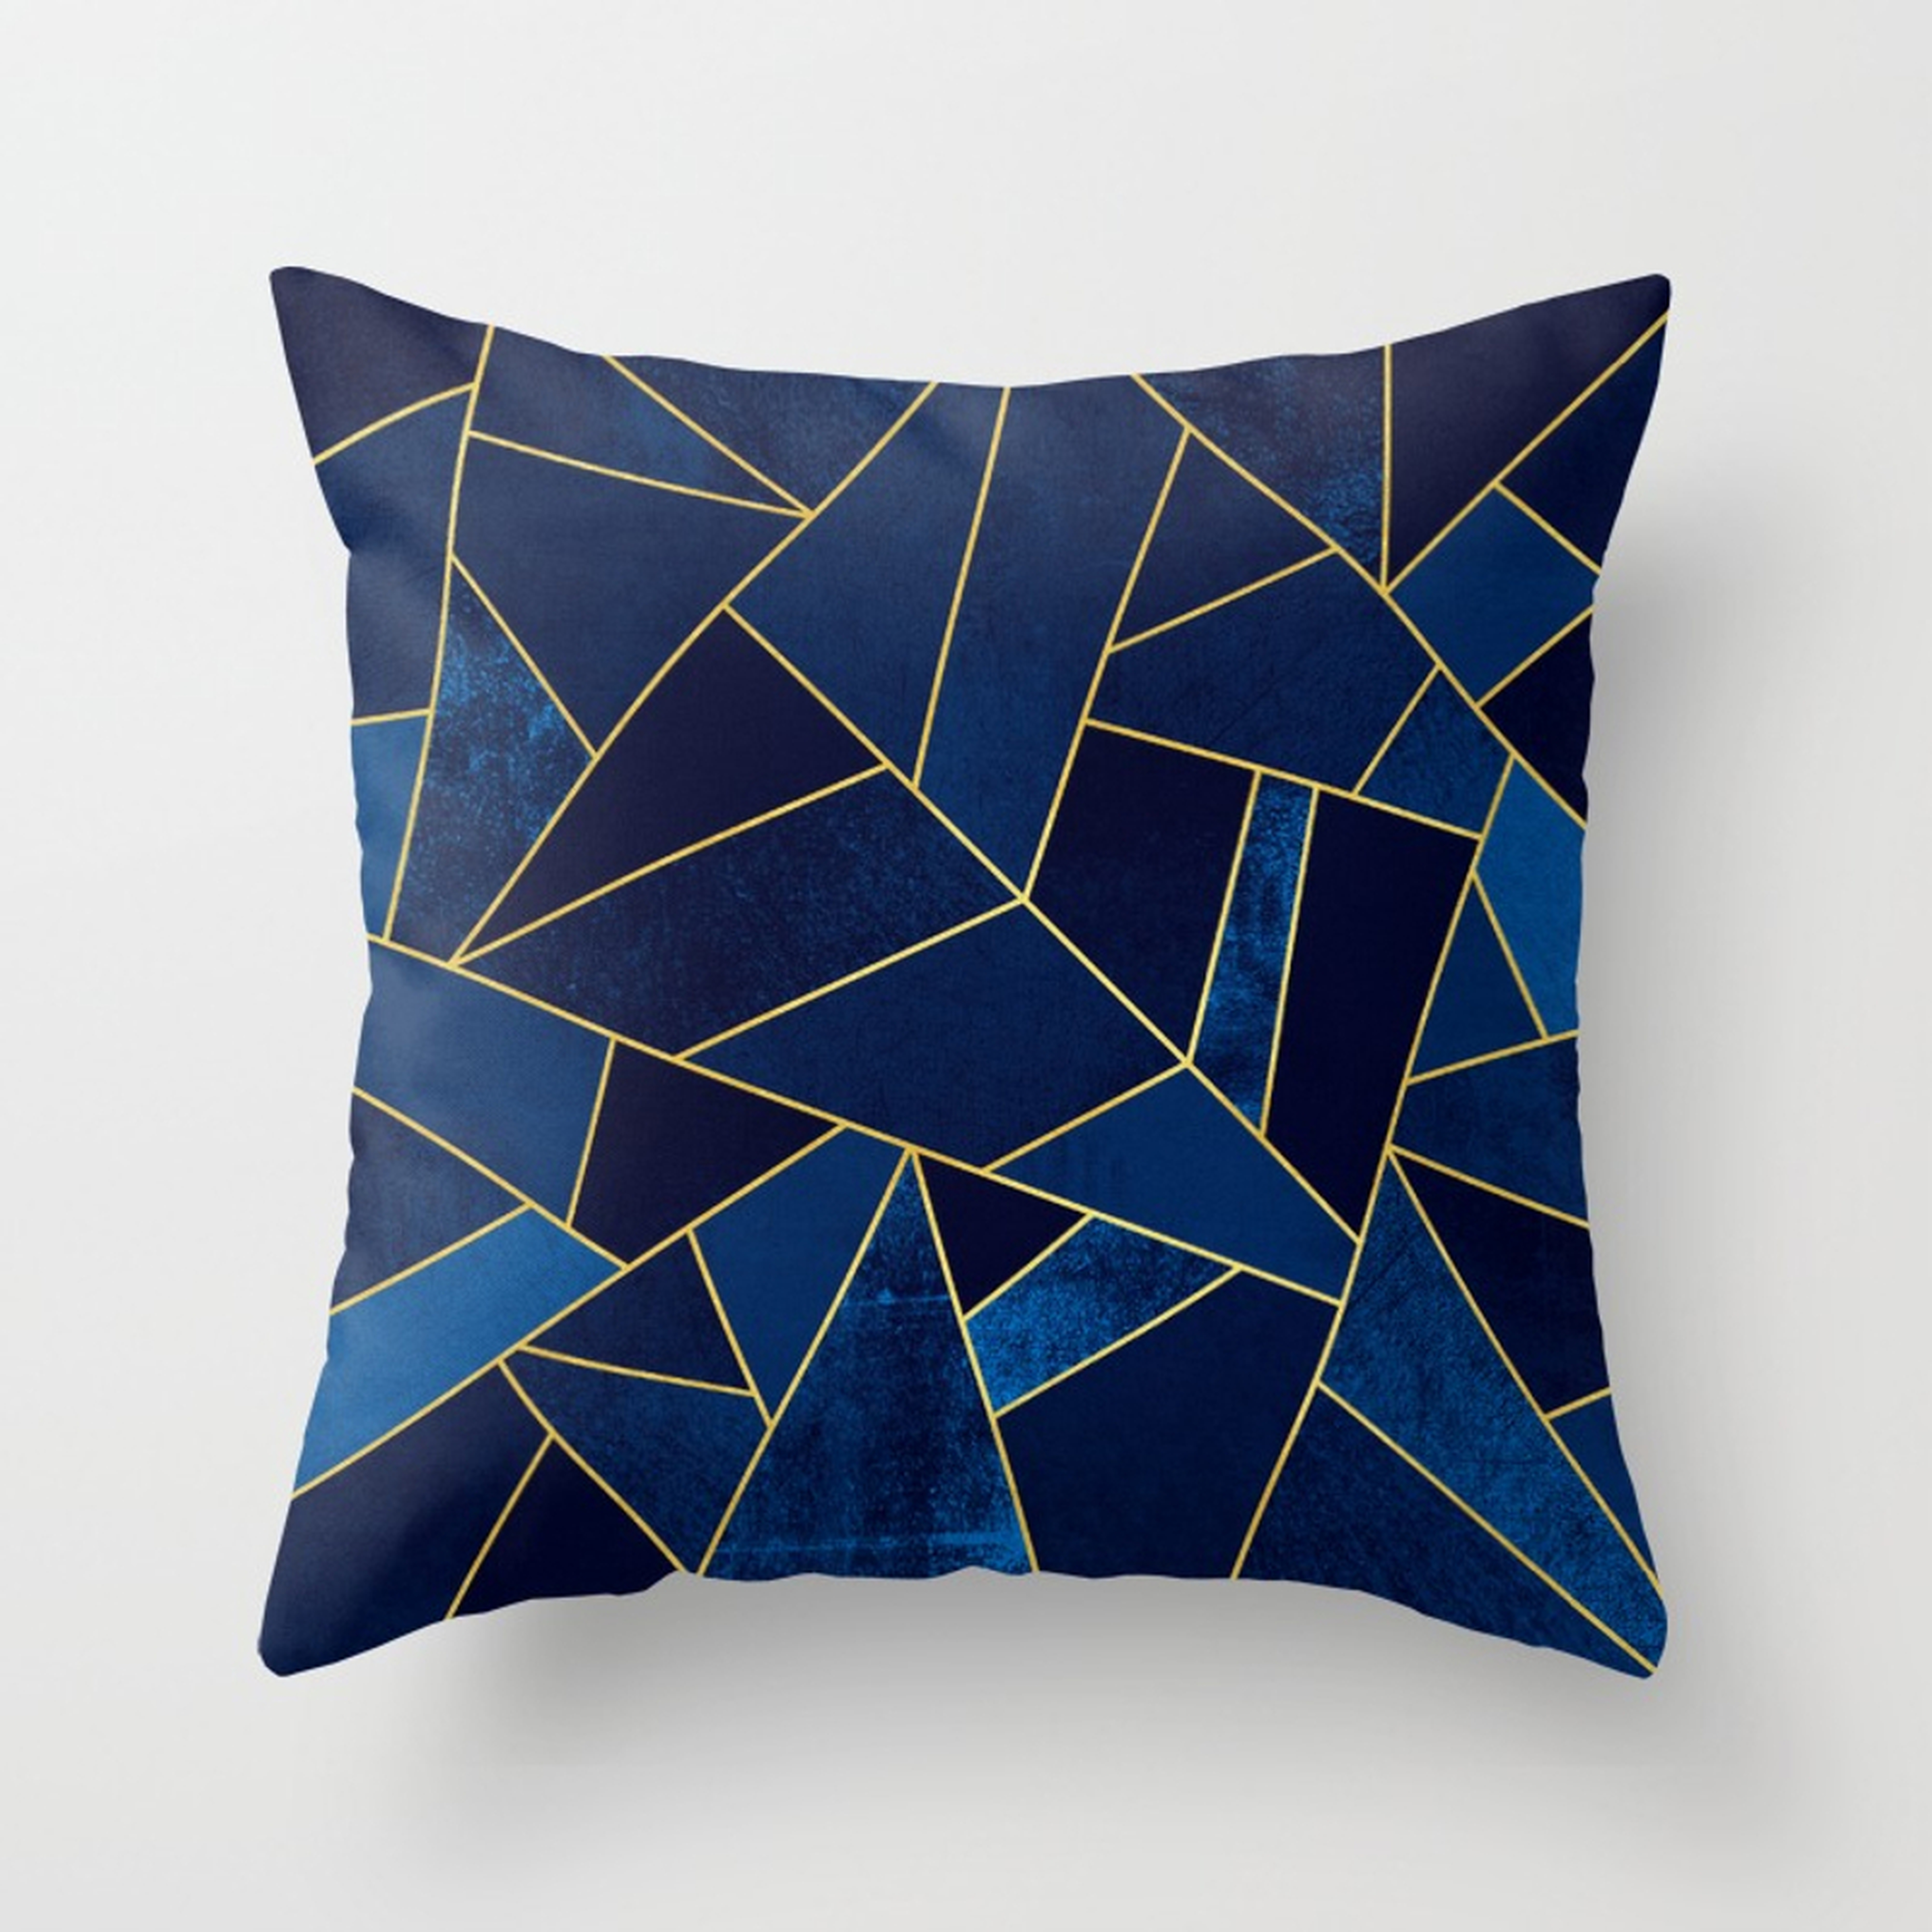 Blue stone with yellow lines Throw Pillow - Indoor Cover (16" x 16") with pillow insert by Elisabethfredriksson - Society6